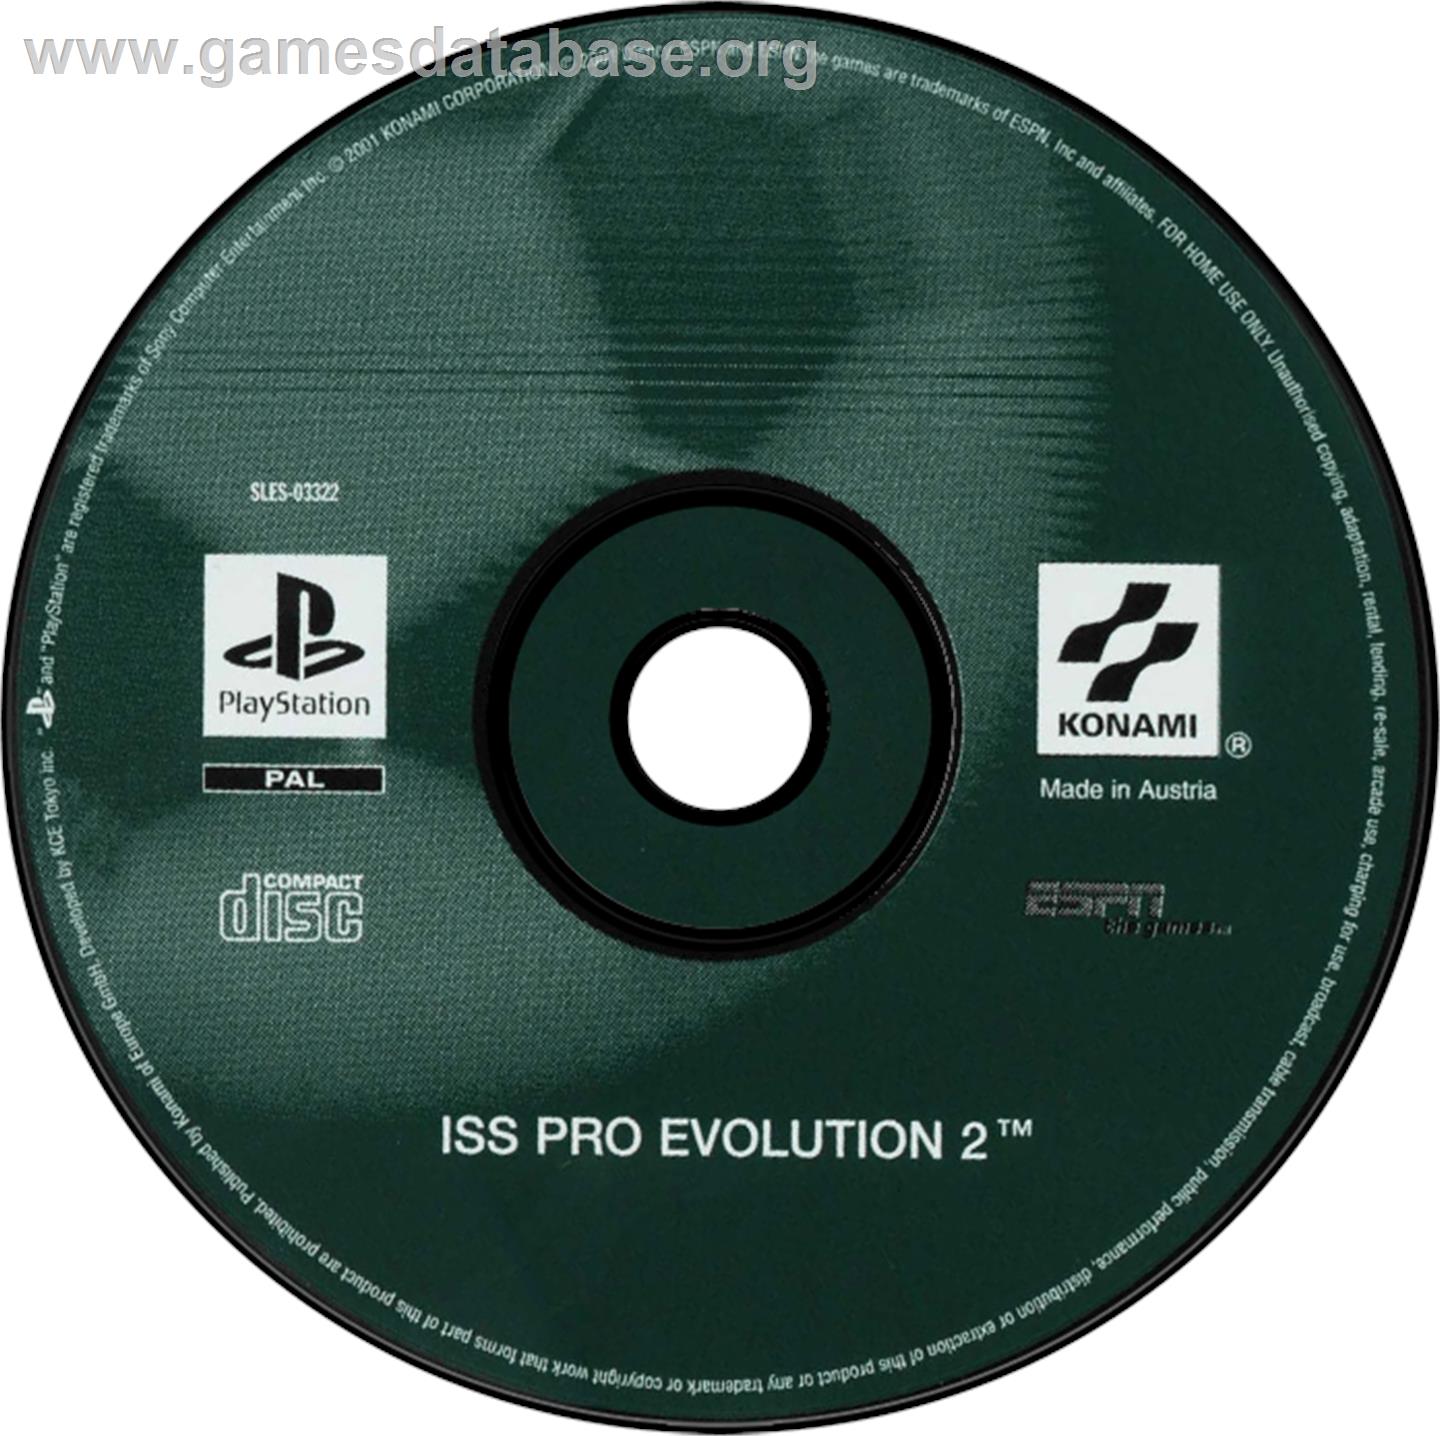 ISS Pro Evolution 2 - Sony Playstation - Artwork - Disc